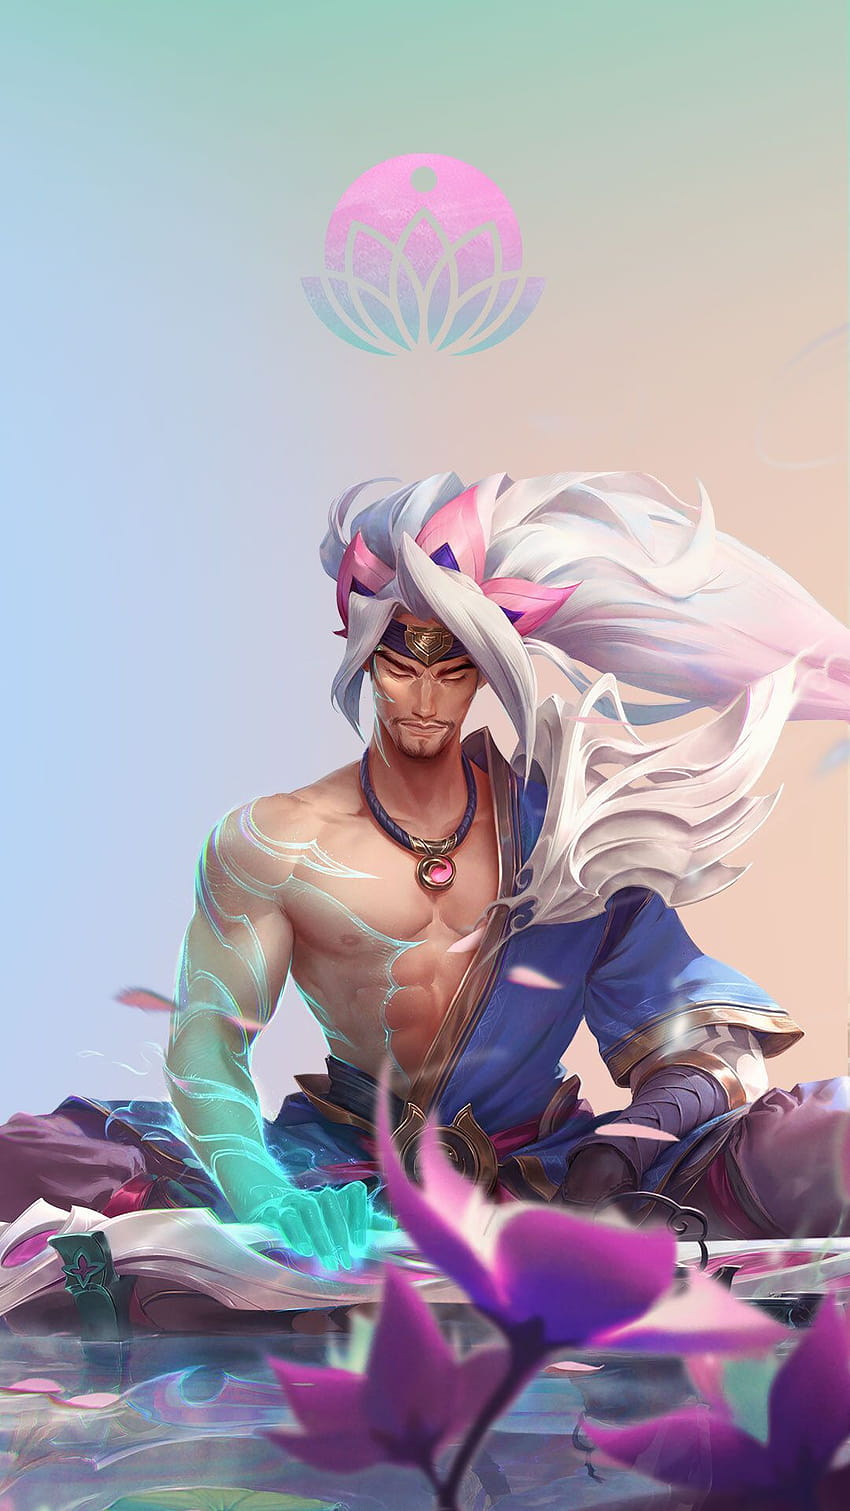 since I saw that yasuo/yone mobile , here's another one with only yasuo : YasuoMains, yasuo and yone HD phone wallpaper